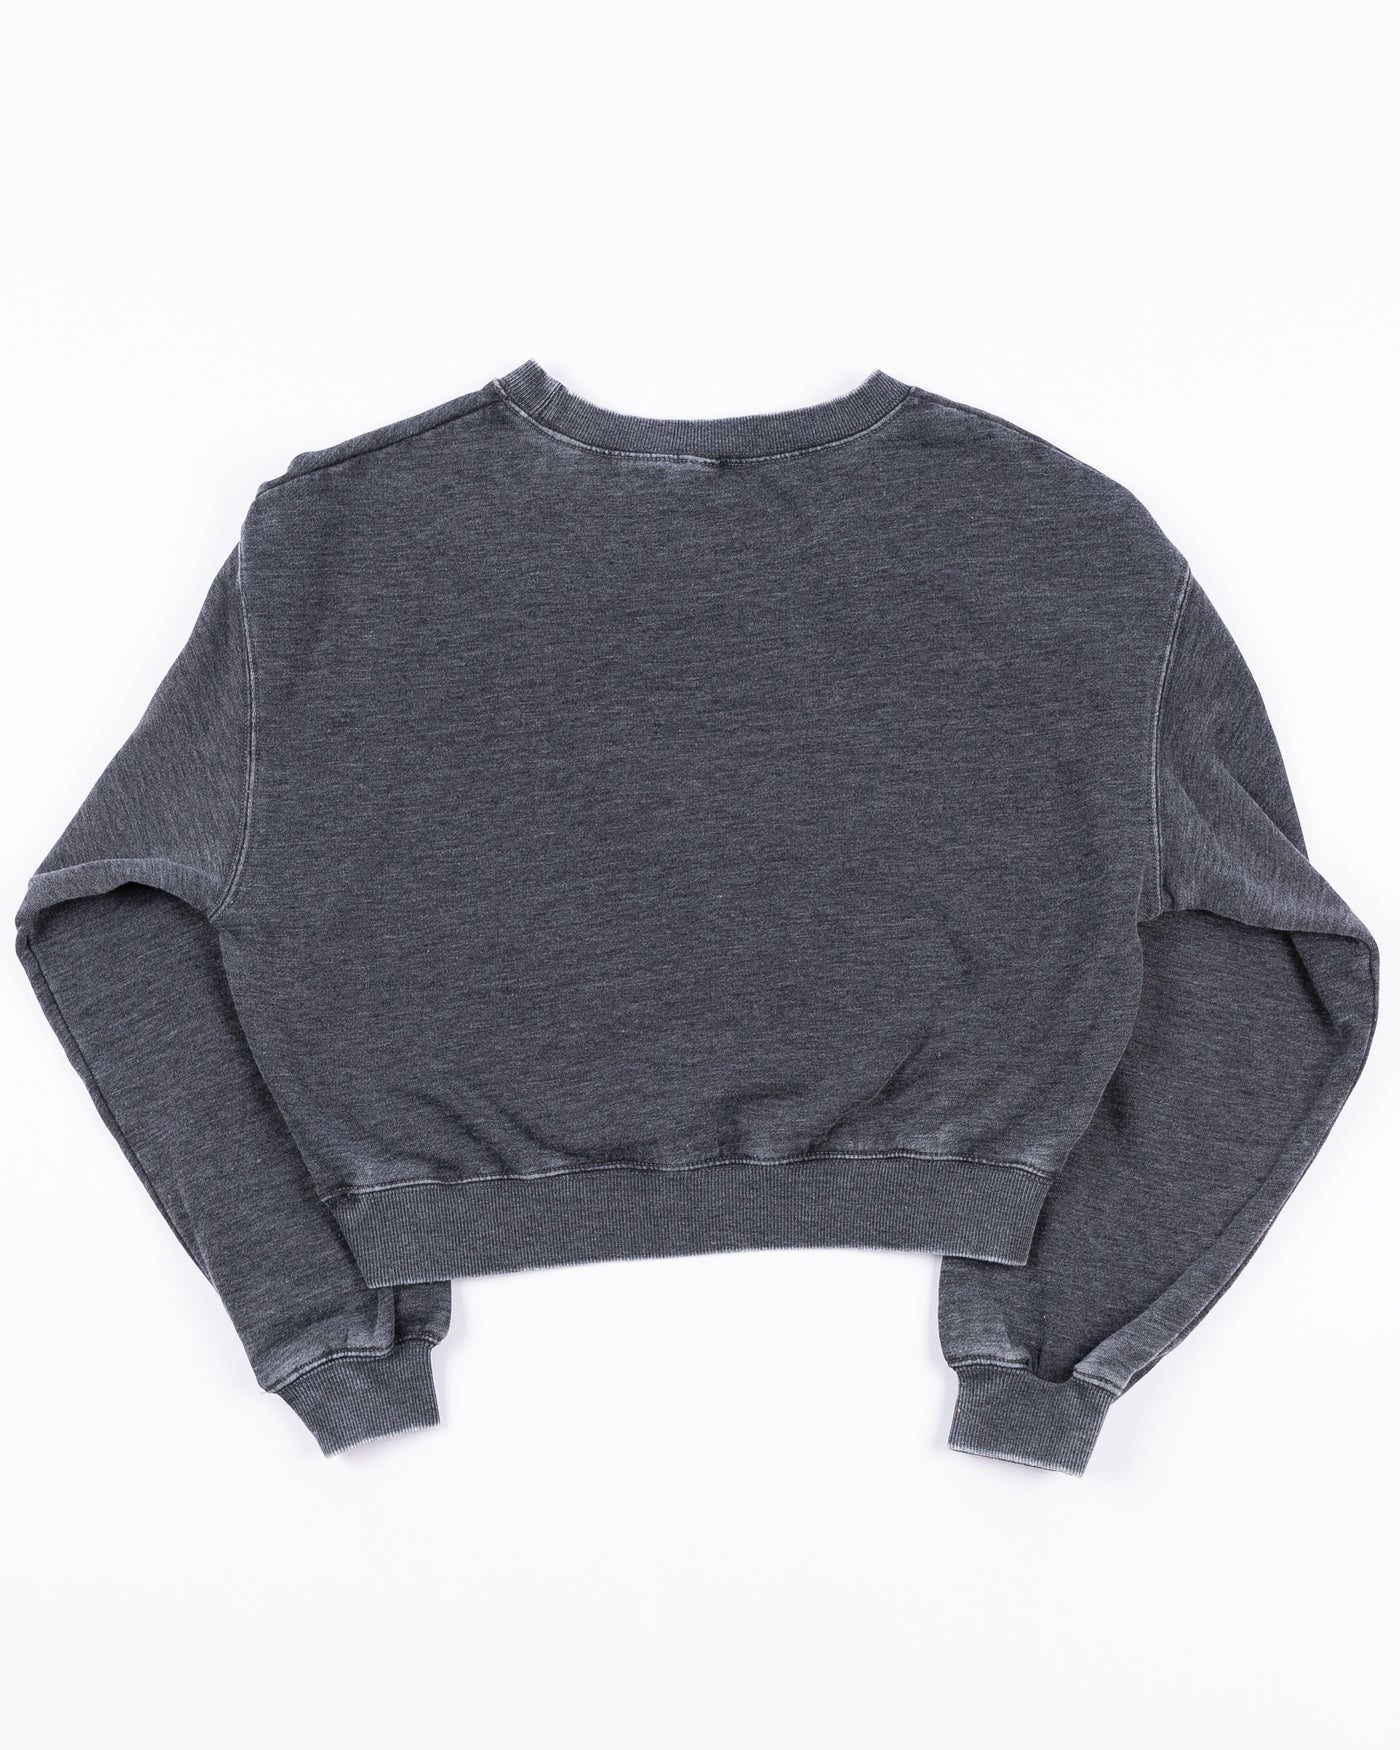 grey cropped chicka-d crewneck sweater with Chicago Blackhawks wordmark and primary logo across chest - back lay flat